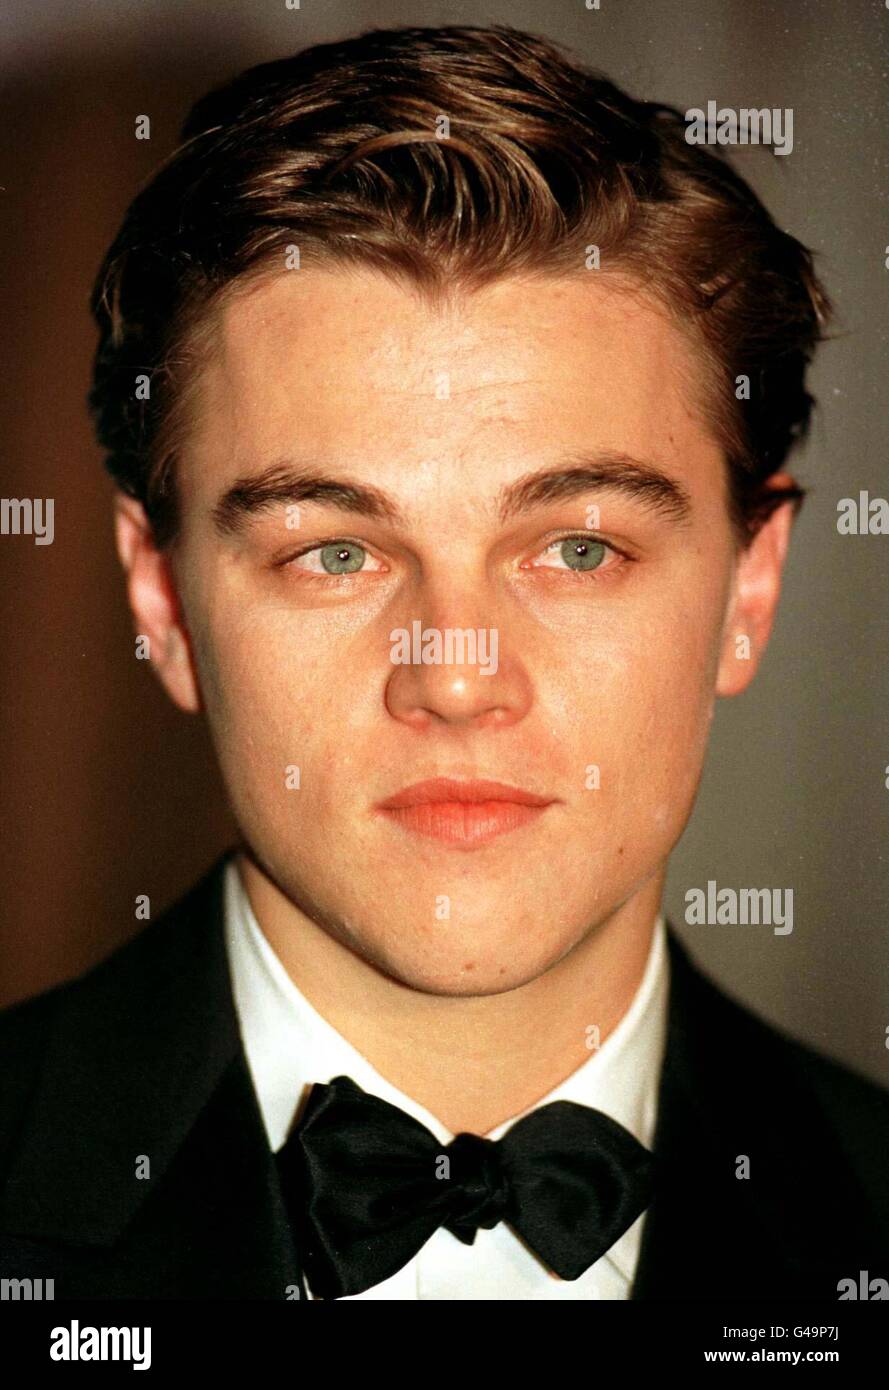 LEONARDO DICAPRIO AT THE ROYAL MOVIE PREMIERE OF 'TITANIC' AT THE ODEON IN LEICESTER SQUARE, LONDON Stock Photo